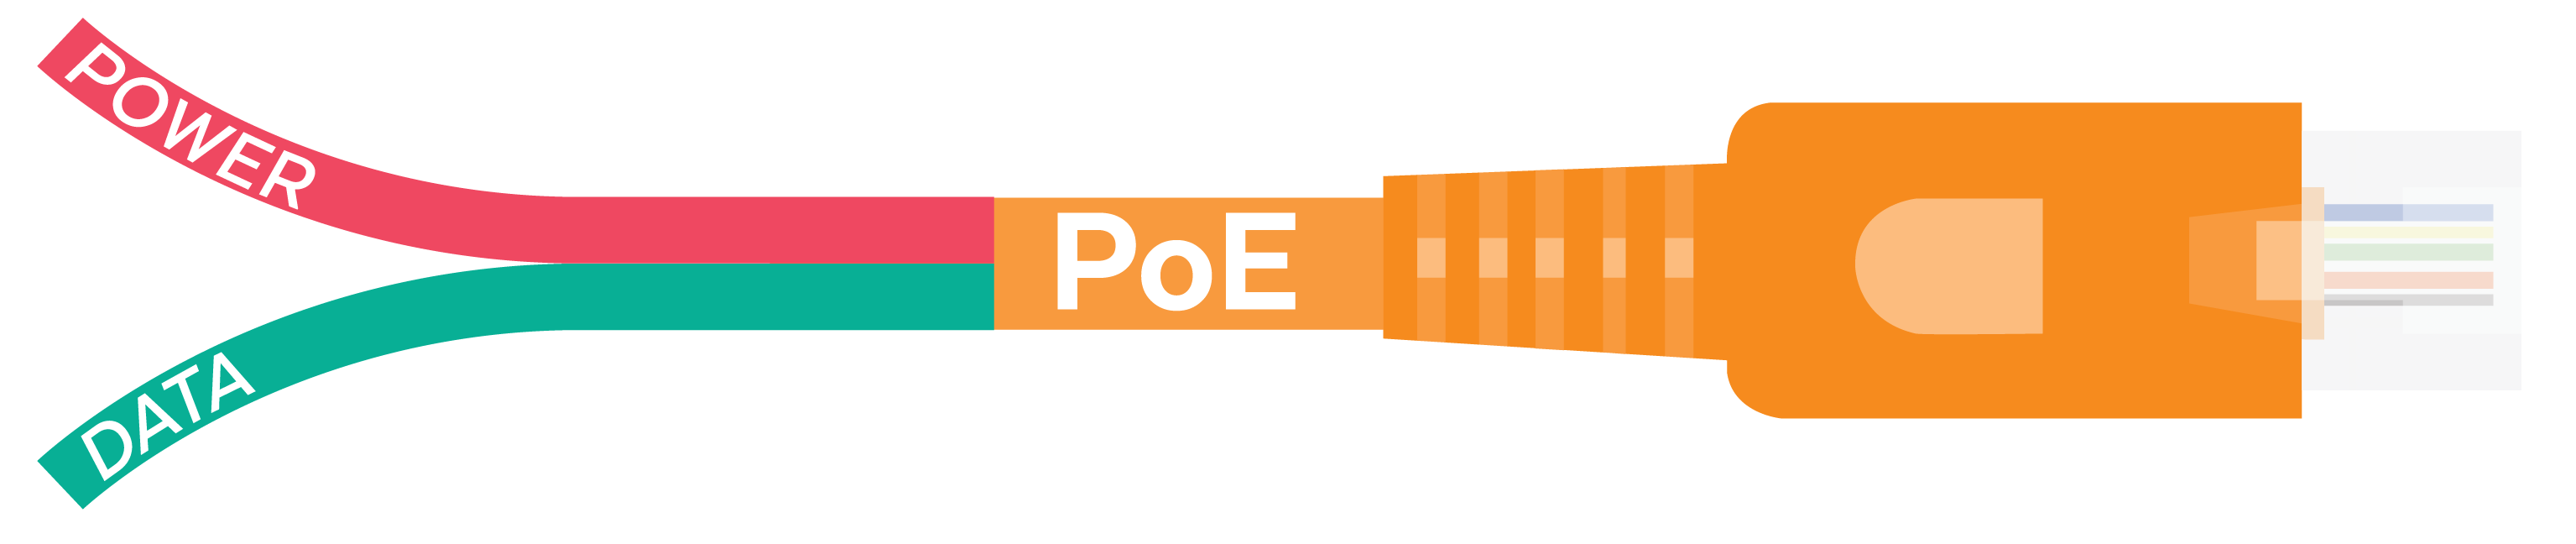 PoE Cable